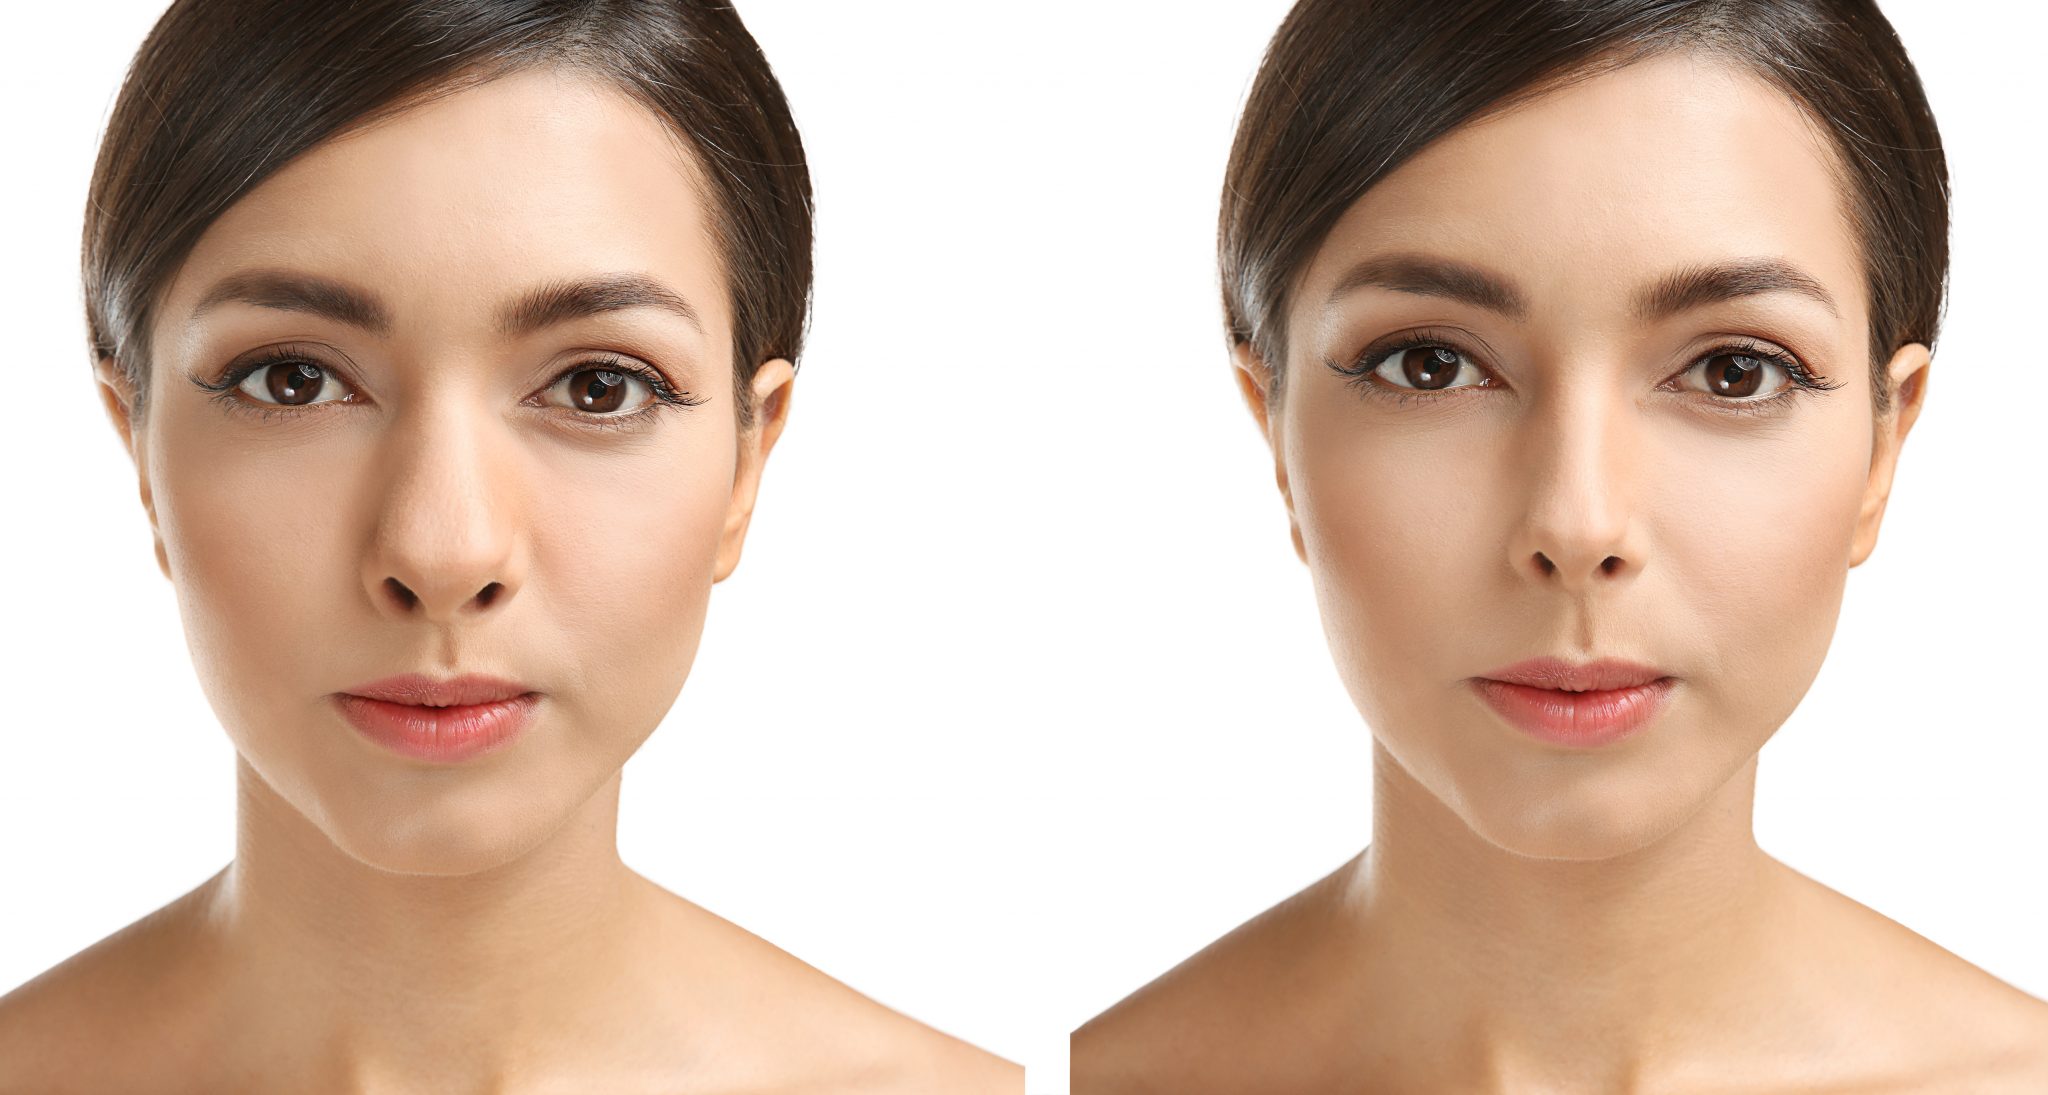 Young woman before and after rhinoplasty.